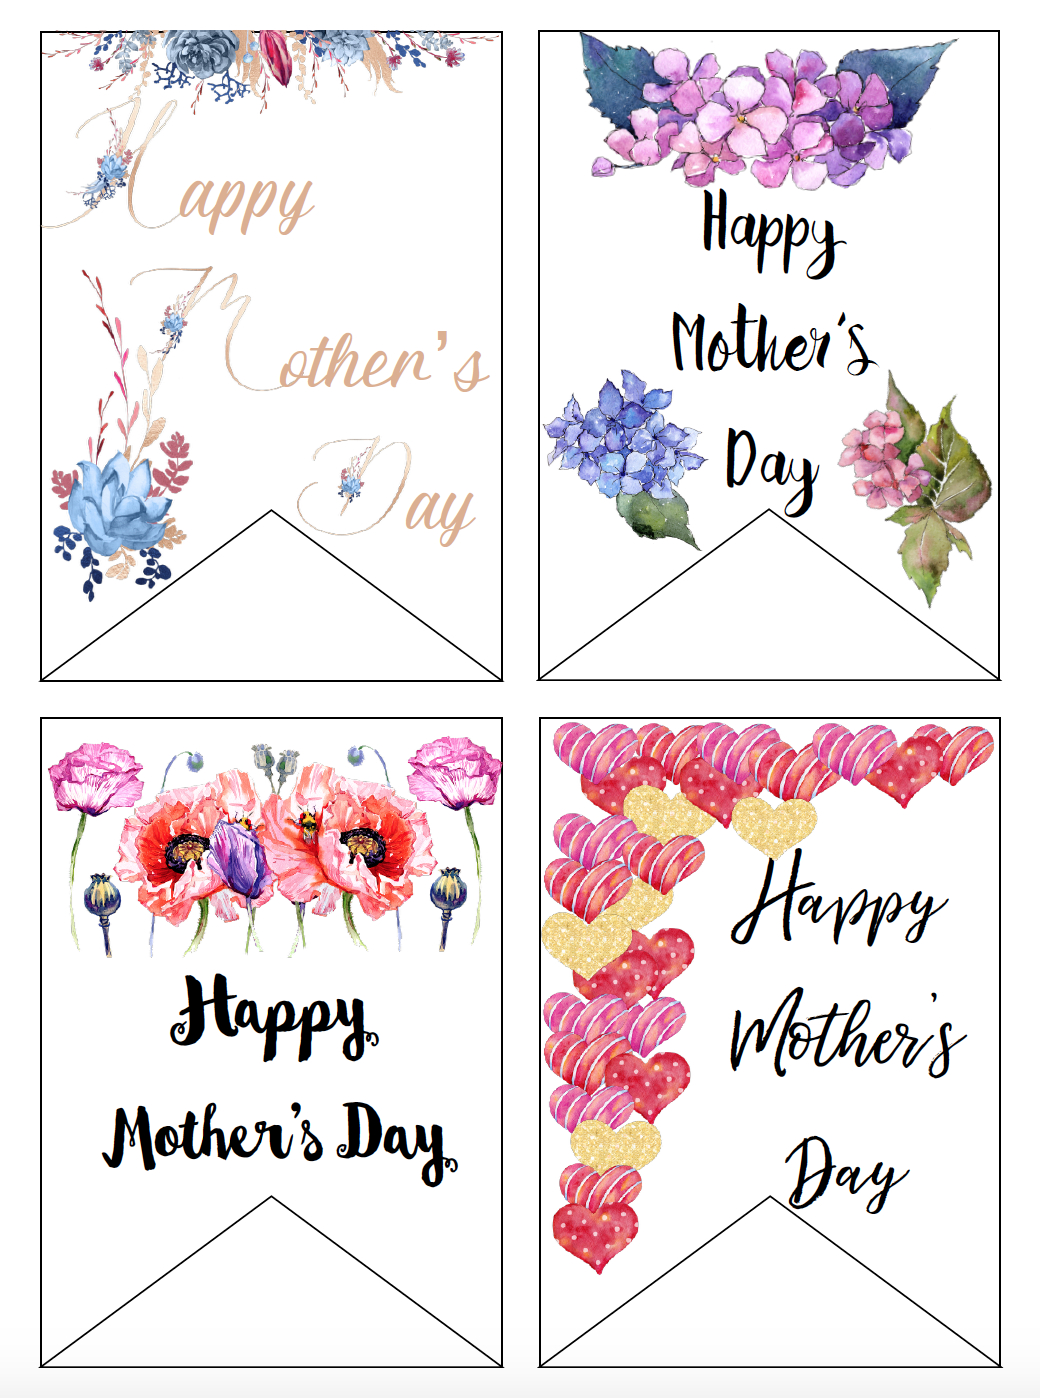 Free Printable Mother&amp;#039;s Day Cards And Gift Tags - Free Printable Mothers Day Gifts